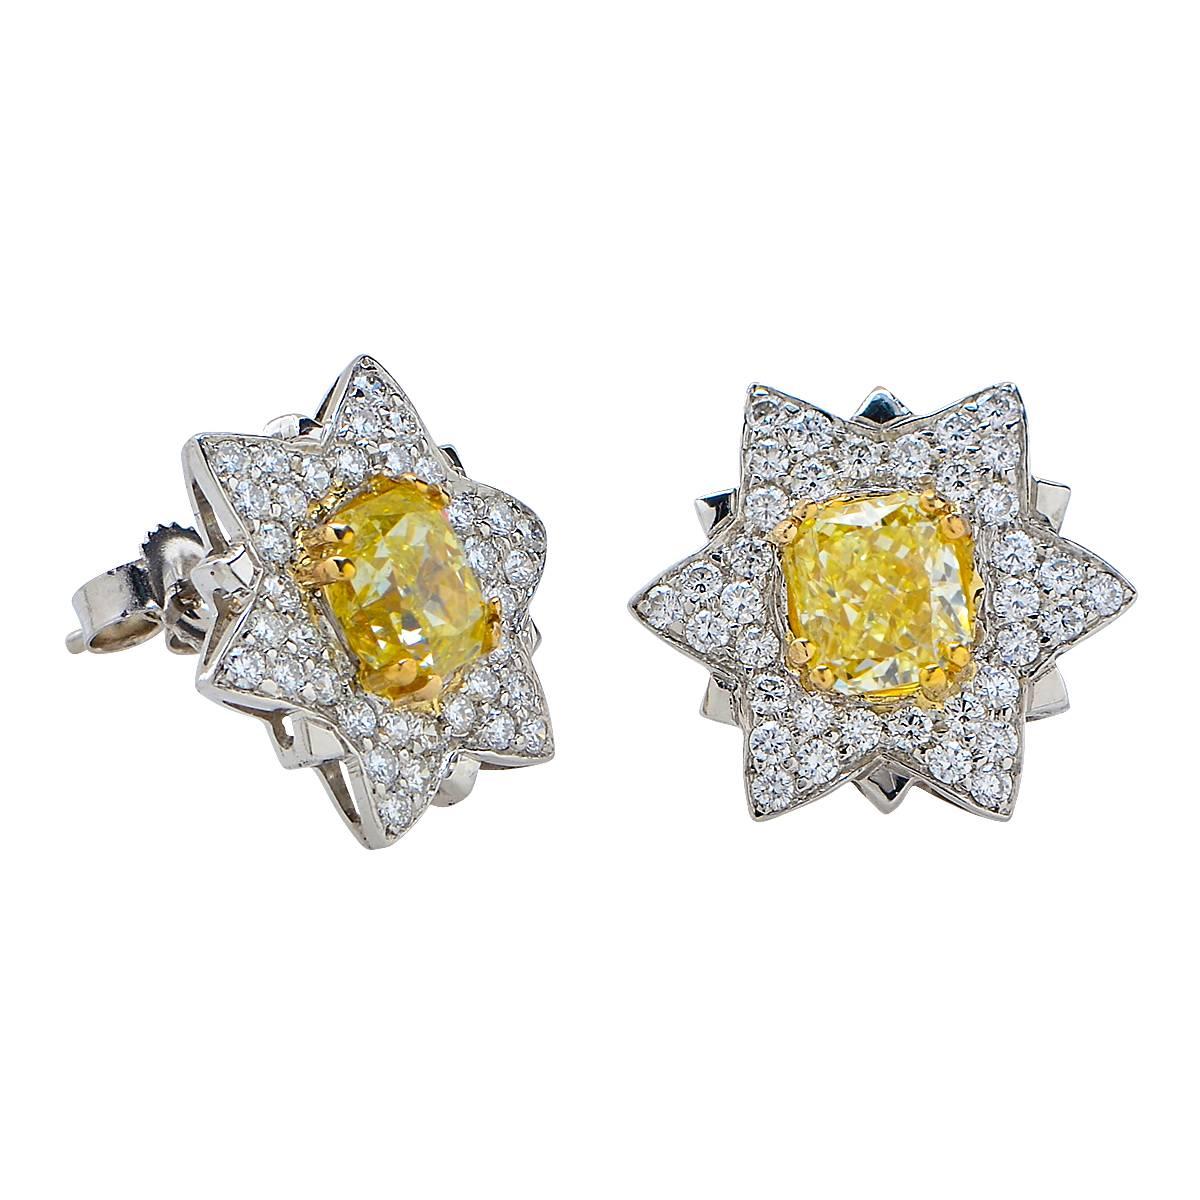 Platinum Earrings Set with 2 Radiant Cut Natural Fancy Yellow Diamonds Weighing Approximately 1.98 Carats Surrounded by .72 Carats of Round Brilliant Cut Diamonds.

Weight: 3.12 grams

These Earrings are Accompanied by a Retail Appraisal